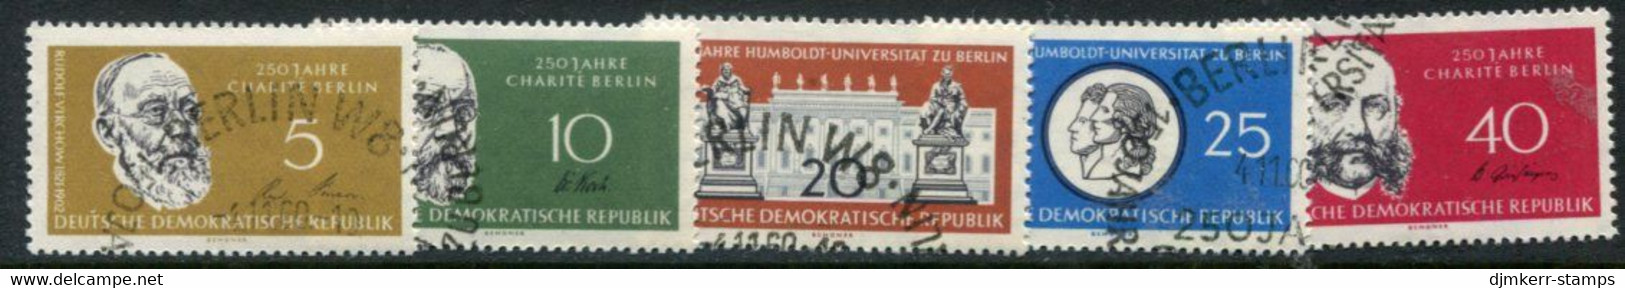 DDR / E. GERMANY 1960 Humboldt University Used.  Michel  795-99 - Used Stamps